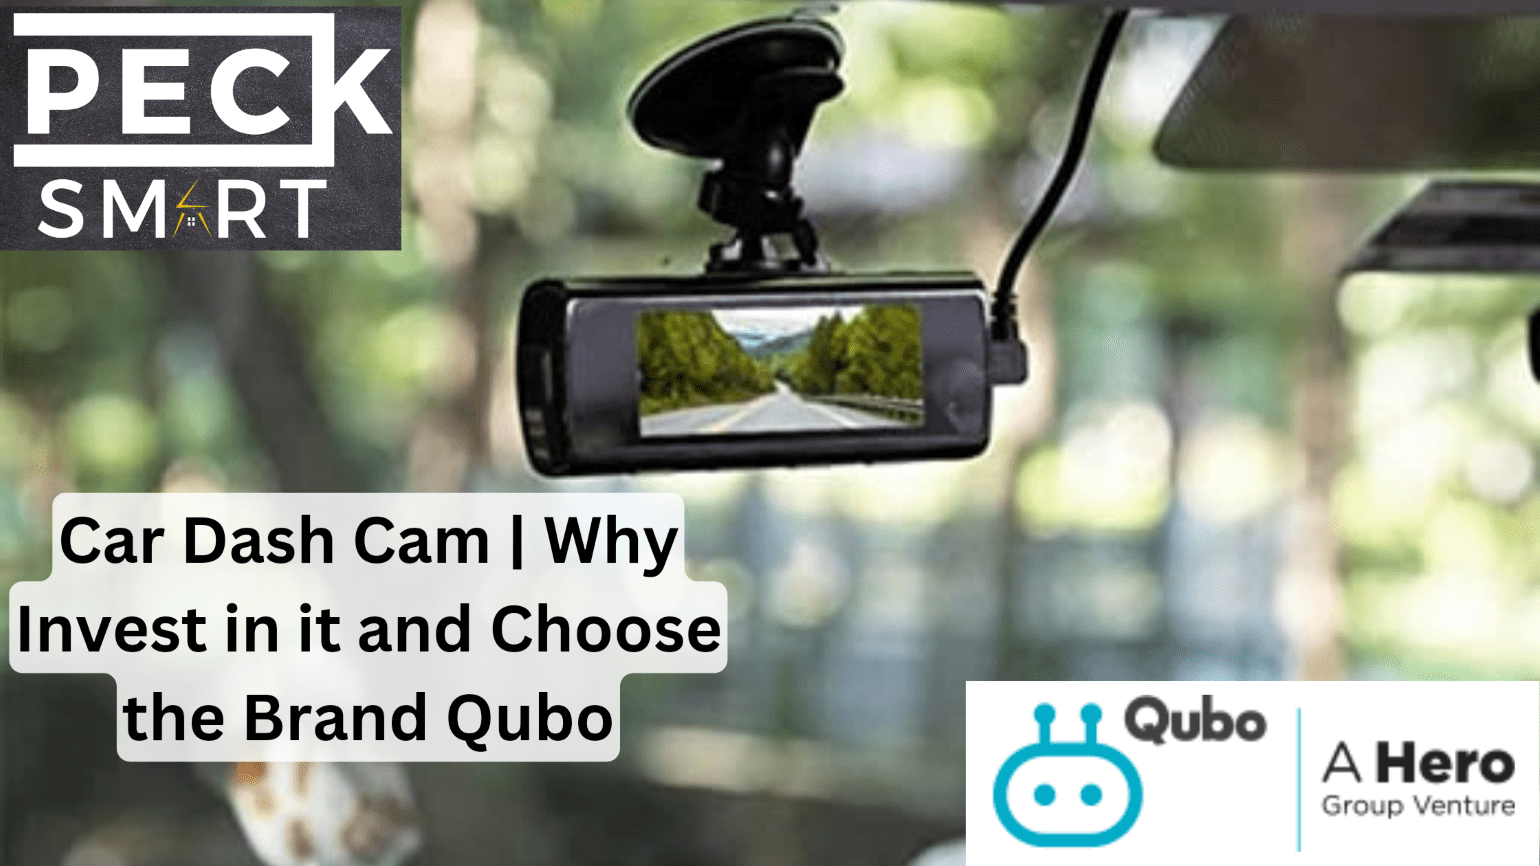 Reasons you should invest in Car Dash Cam and the brand Qubo.